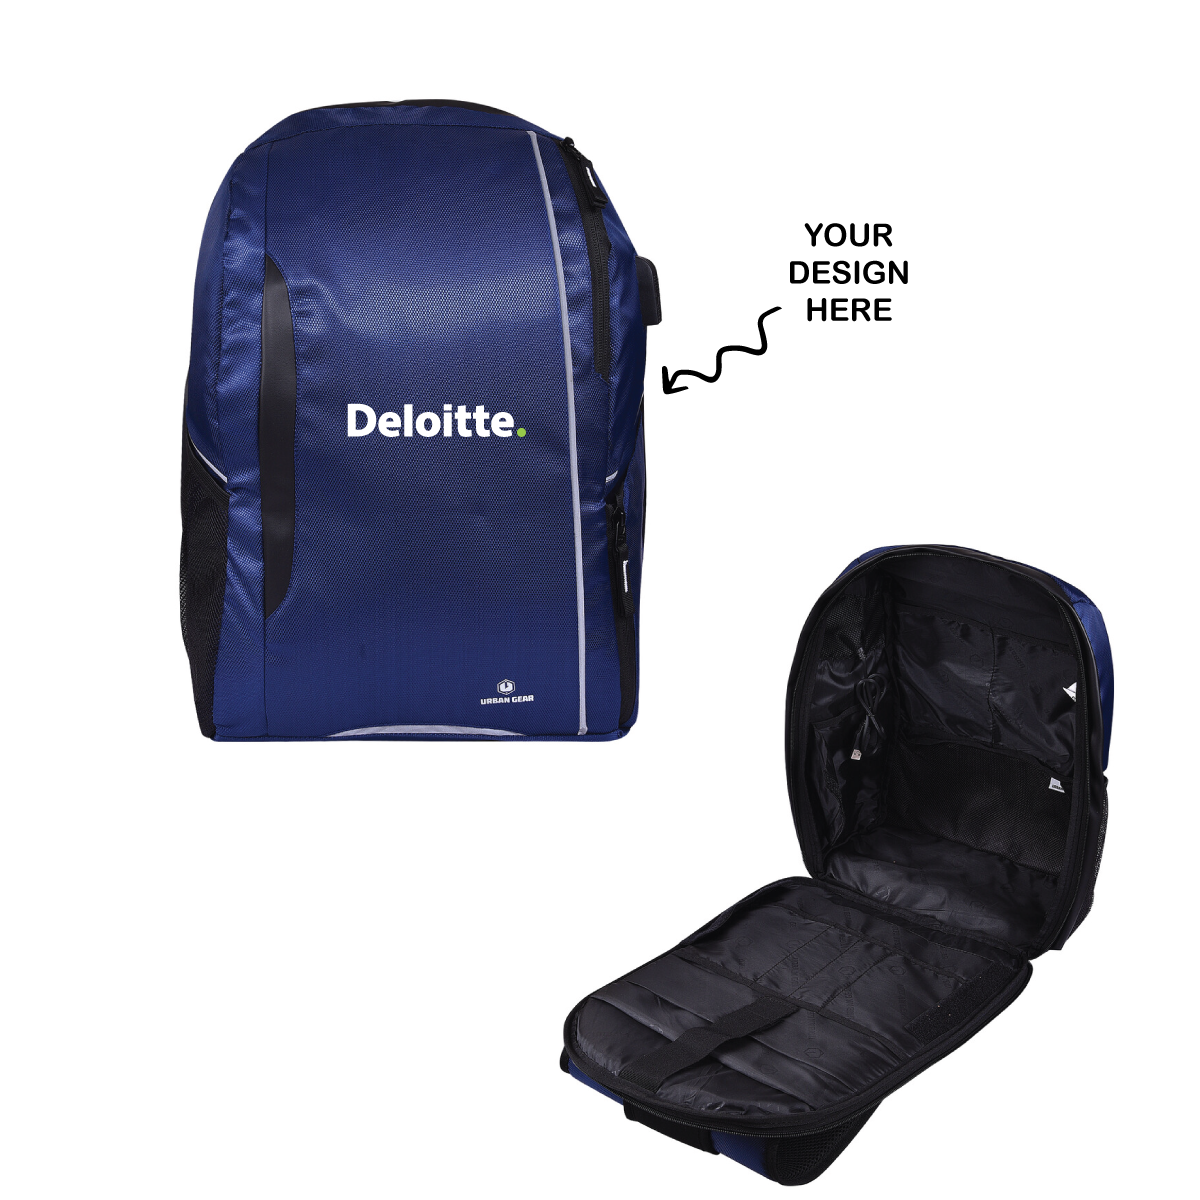 Personalized Anti Theft 14L Backpack - For Employee Gifting, Corporate Gifting, Customer and Stakeholder Gifting, Colleges, Classes, Schools Use - LO-BP06